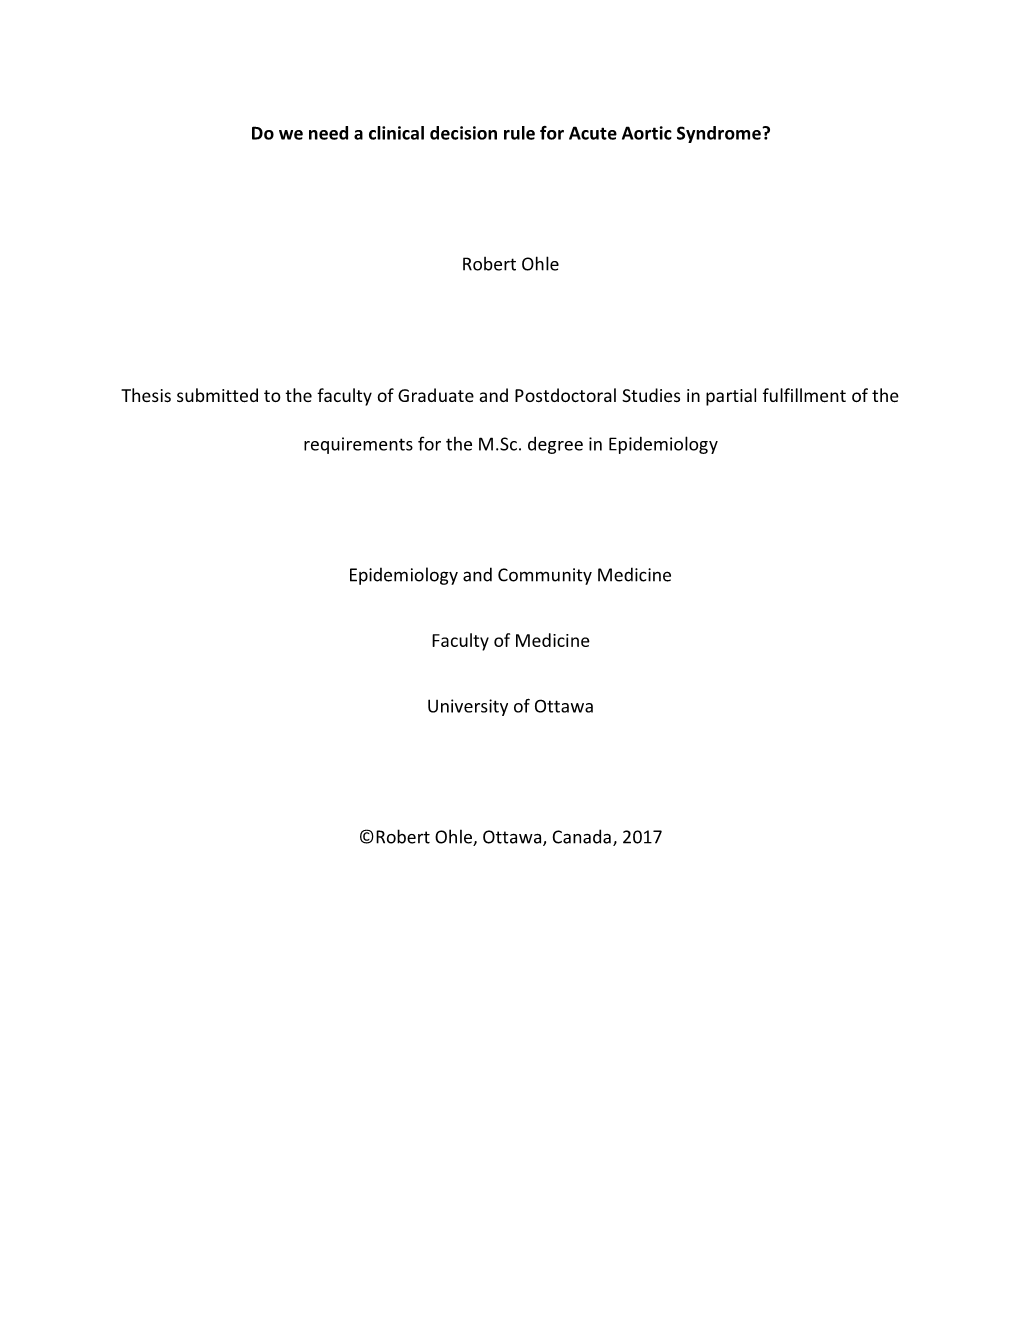 Do We Need a Clinical Decision Rule for Acute Aortic Syndrome? Robert Ohle Thesis Submitted to the Faculty of Graduate and Postd